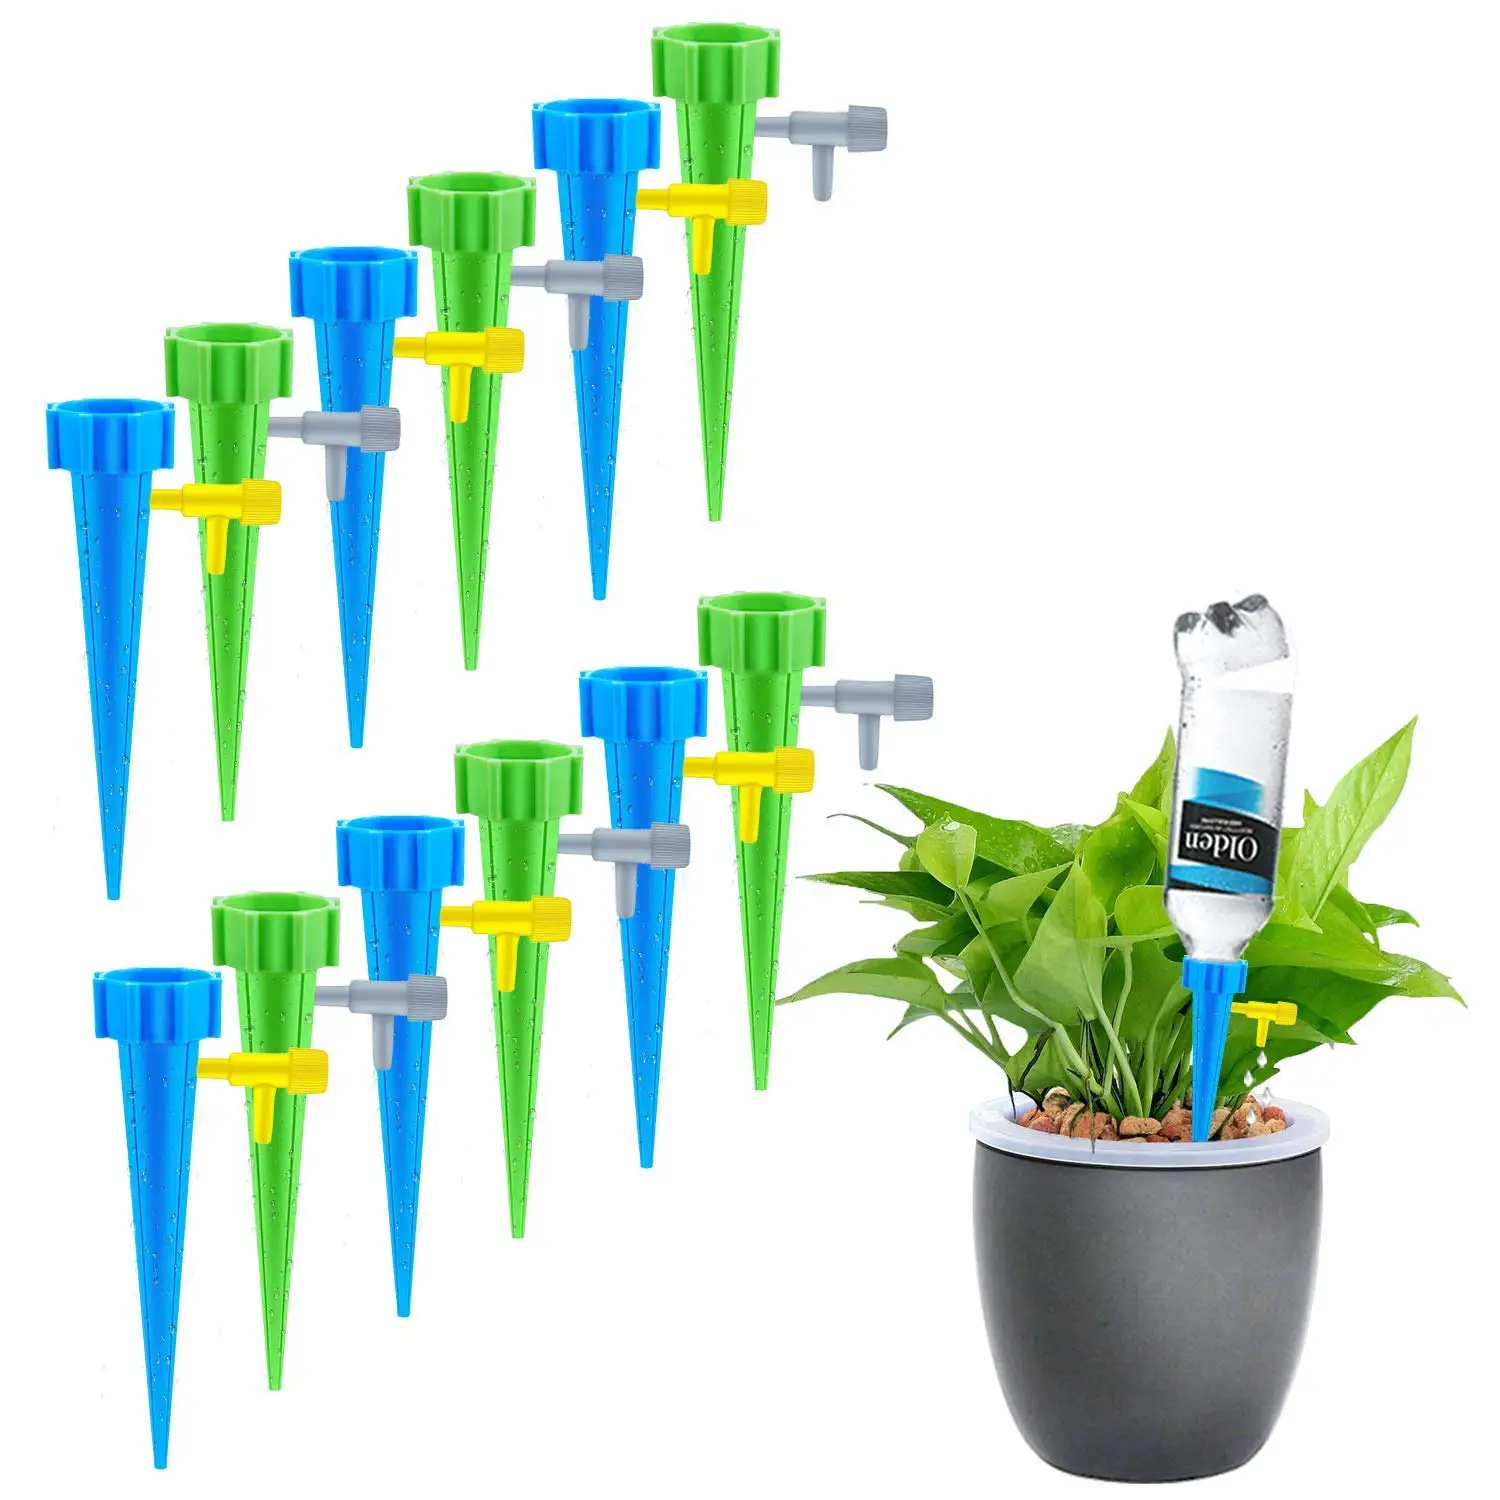 THEKBS Plant Watering Spikes Self Plant Waterer Automatic Vacation Drip Irrigation Watering Devices Watering Globes with Slow Release Control Valve Switch for Plants 6pcs